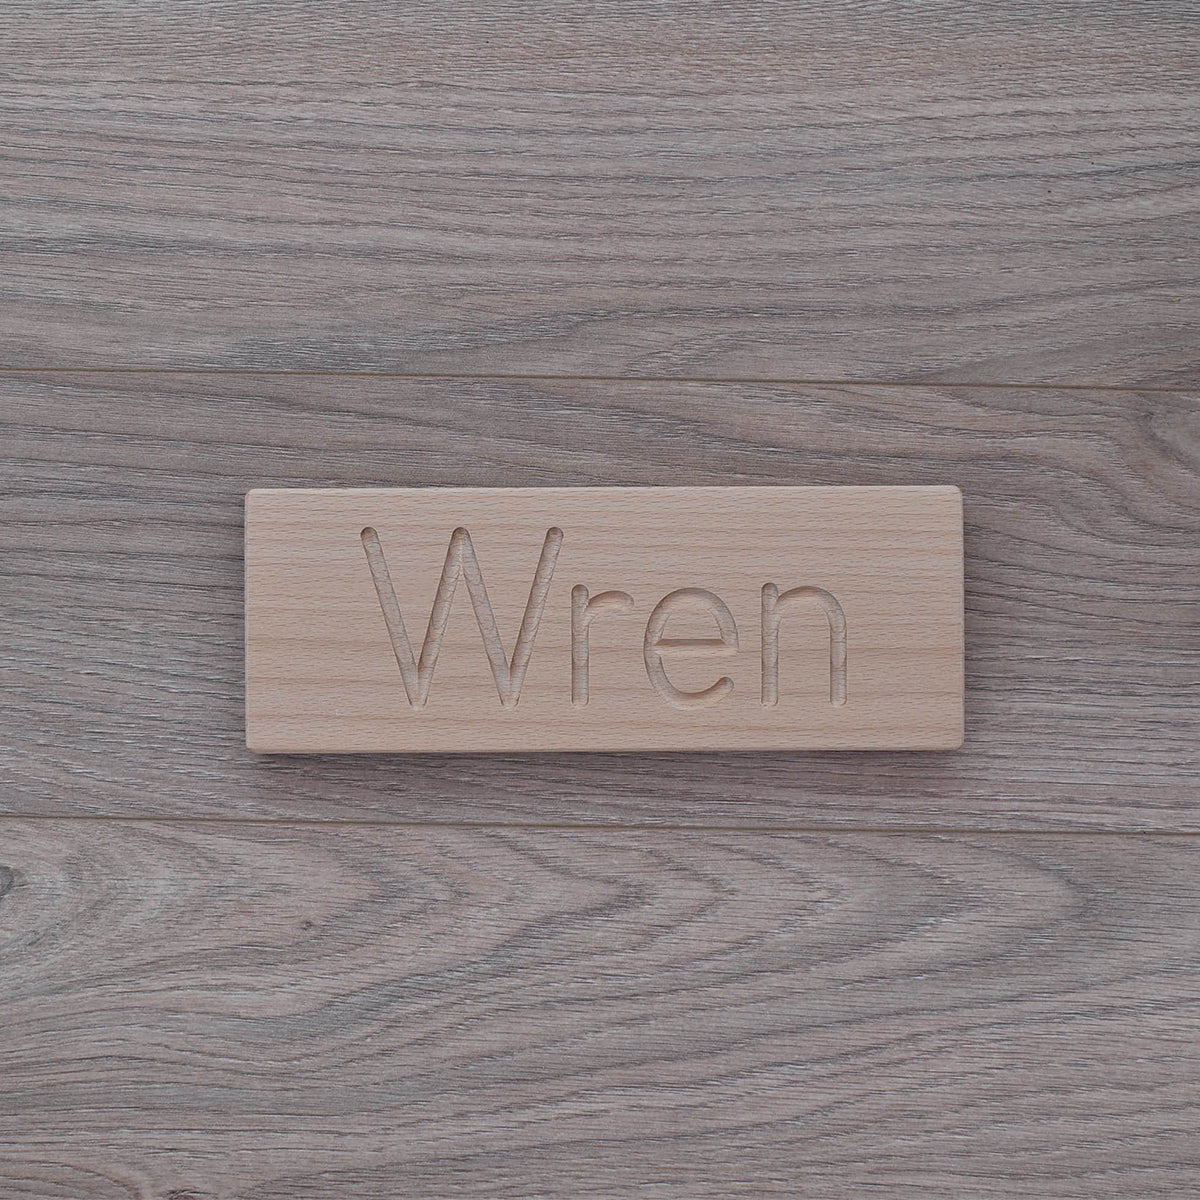 Wren DrawMe personalised wooden name board used for learning to write and fine motor skill sensory play